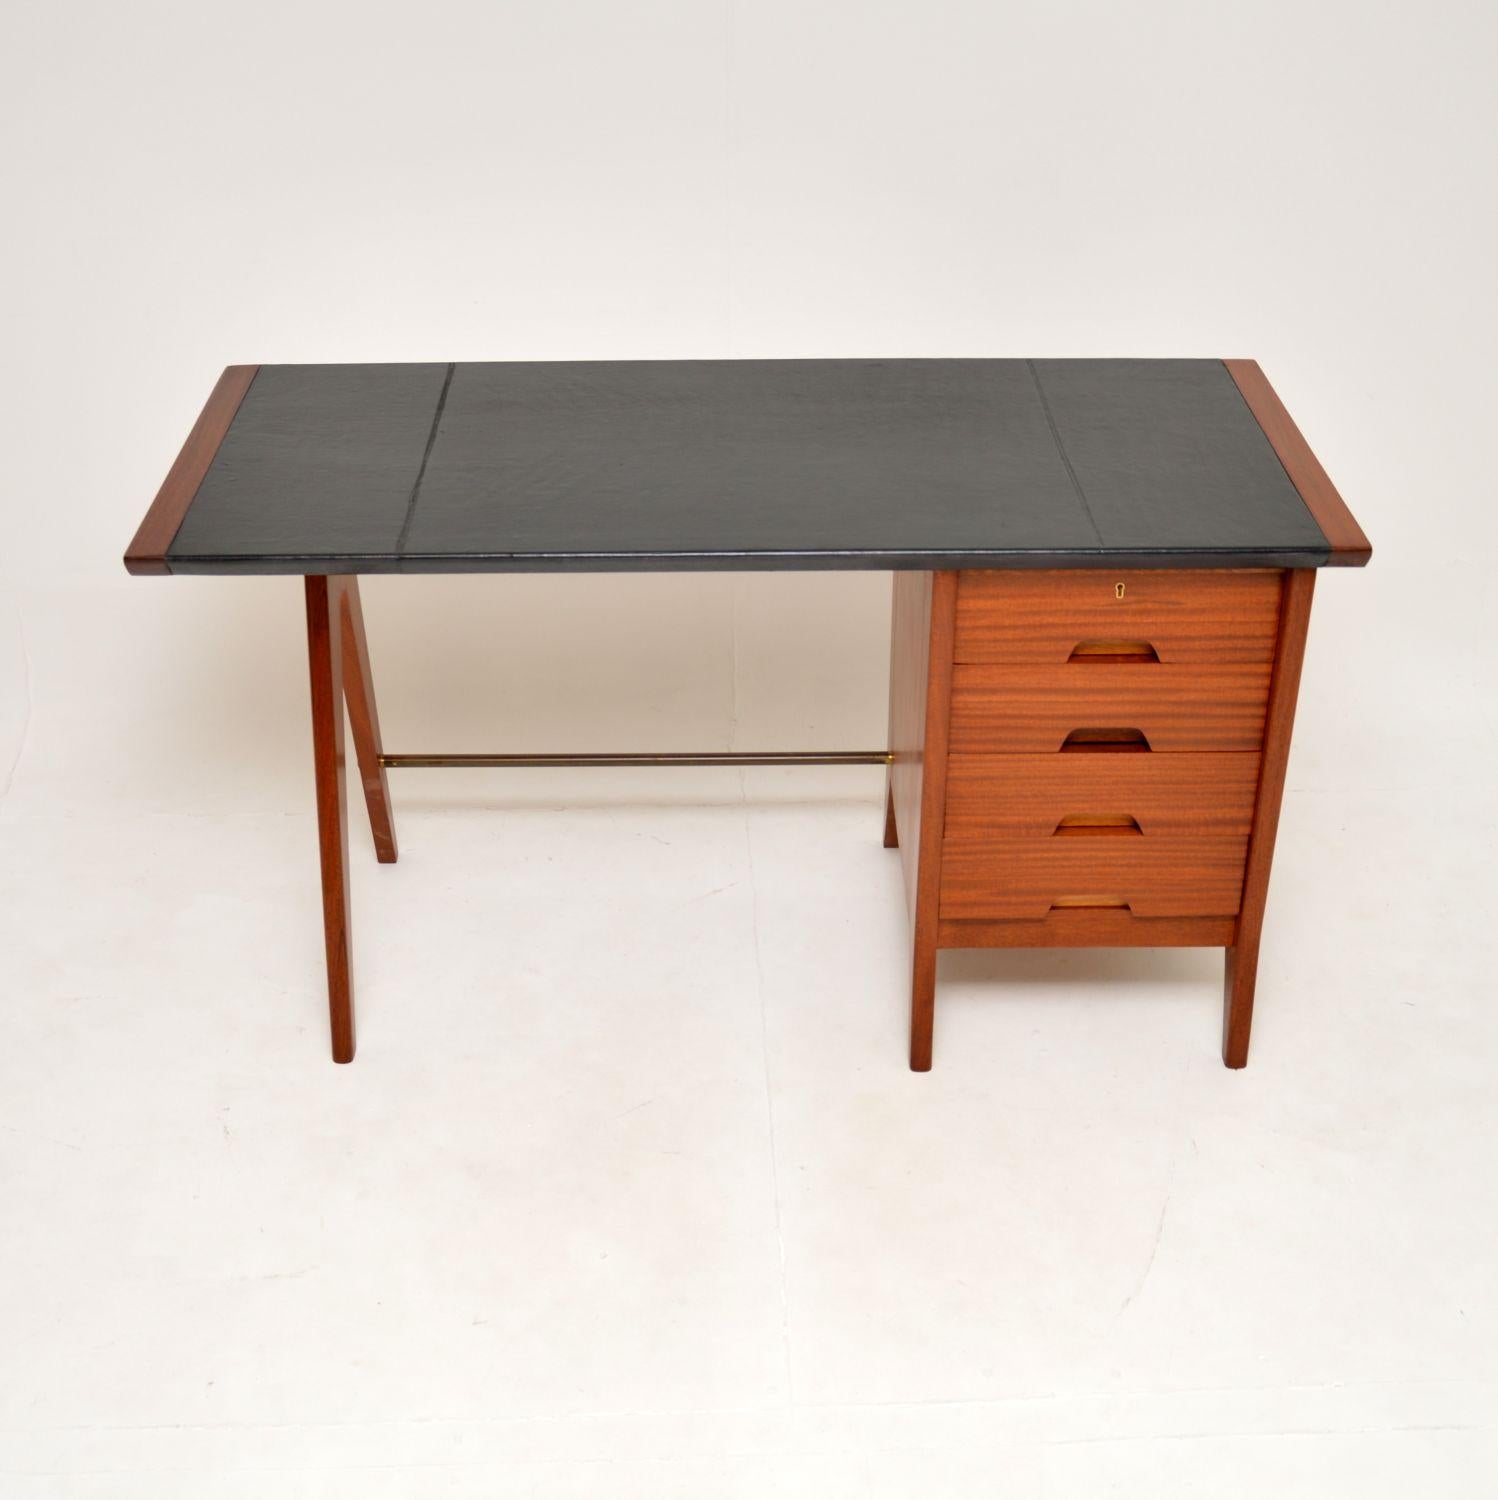 A stunning and very rare vintage leather top desk by Beresford and Hicks. This was made in England, it dates from the 1950-60’s. Beresford and Hicks were manufacturers of extremely high quality furniture, they made very limited amounts, this is a